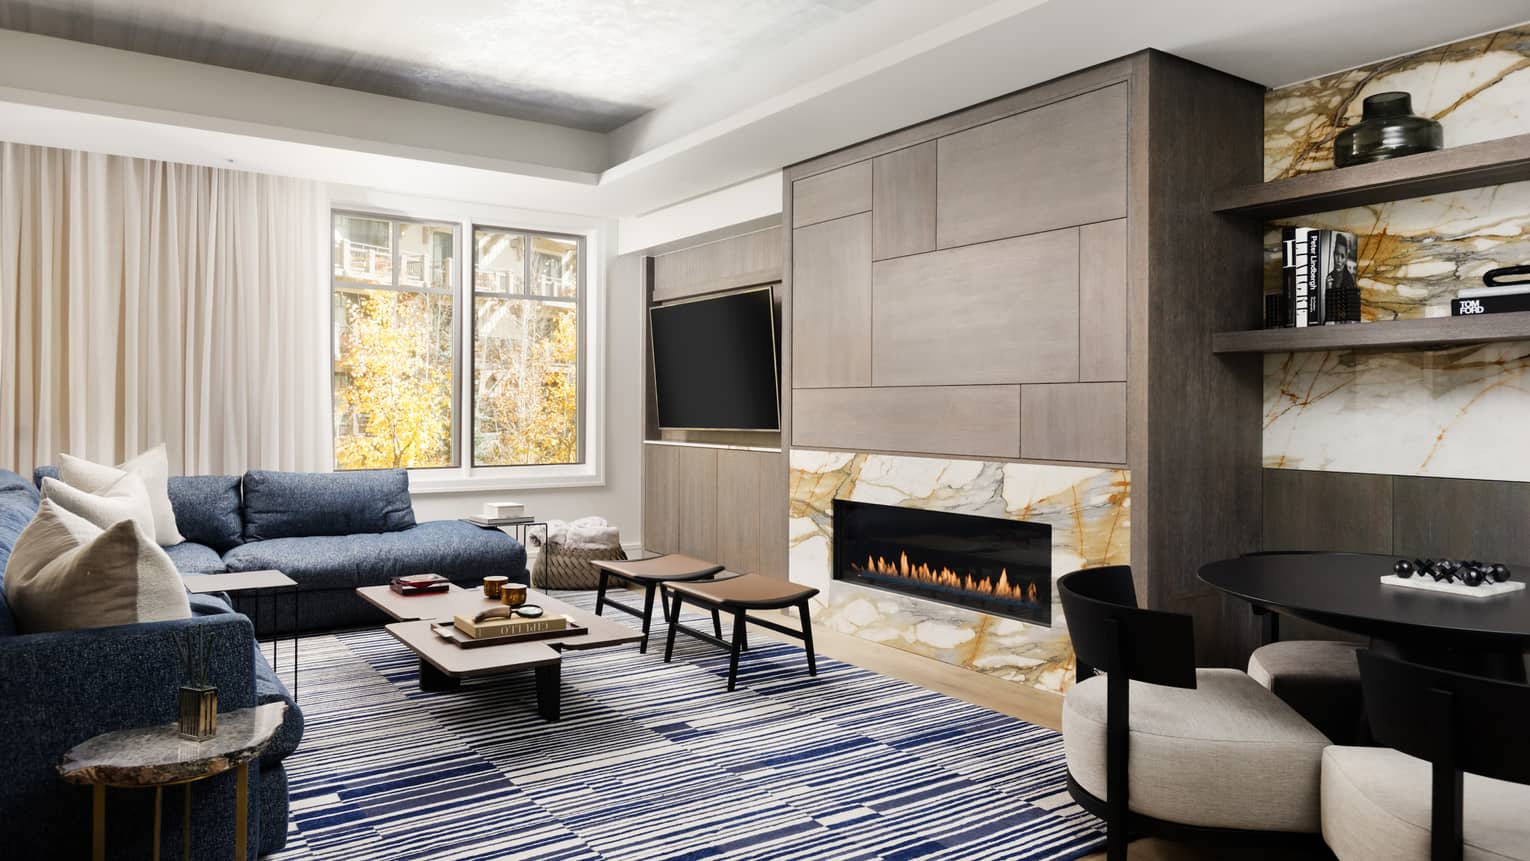 Light-filled living room with modern rectangular fireplace, blue sectional, blue and white rug